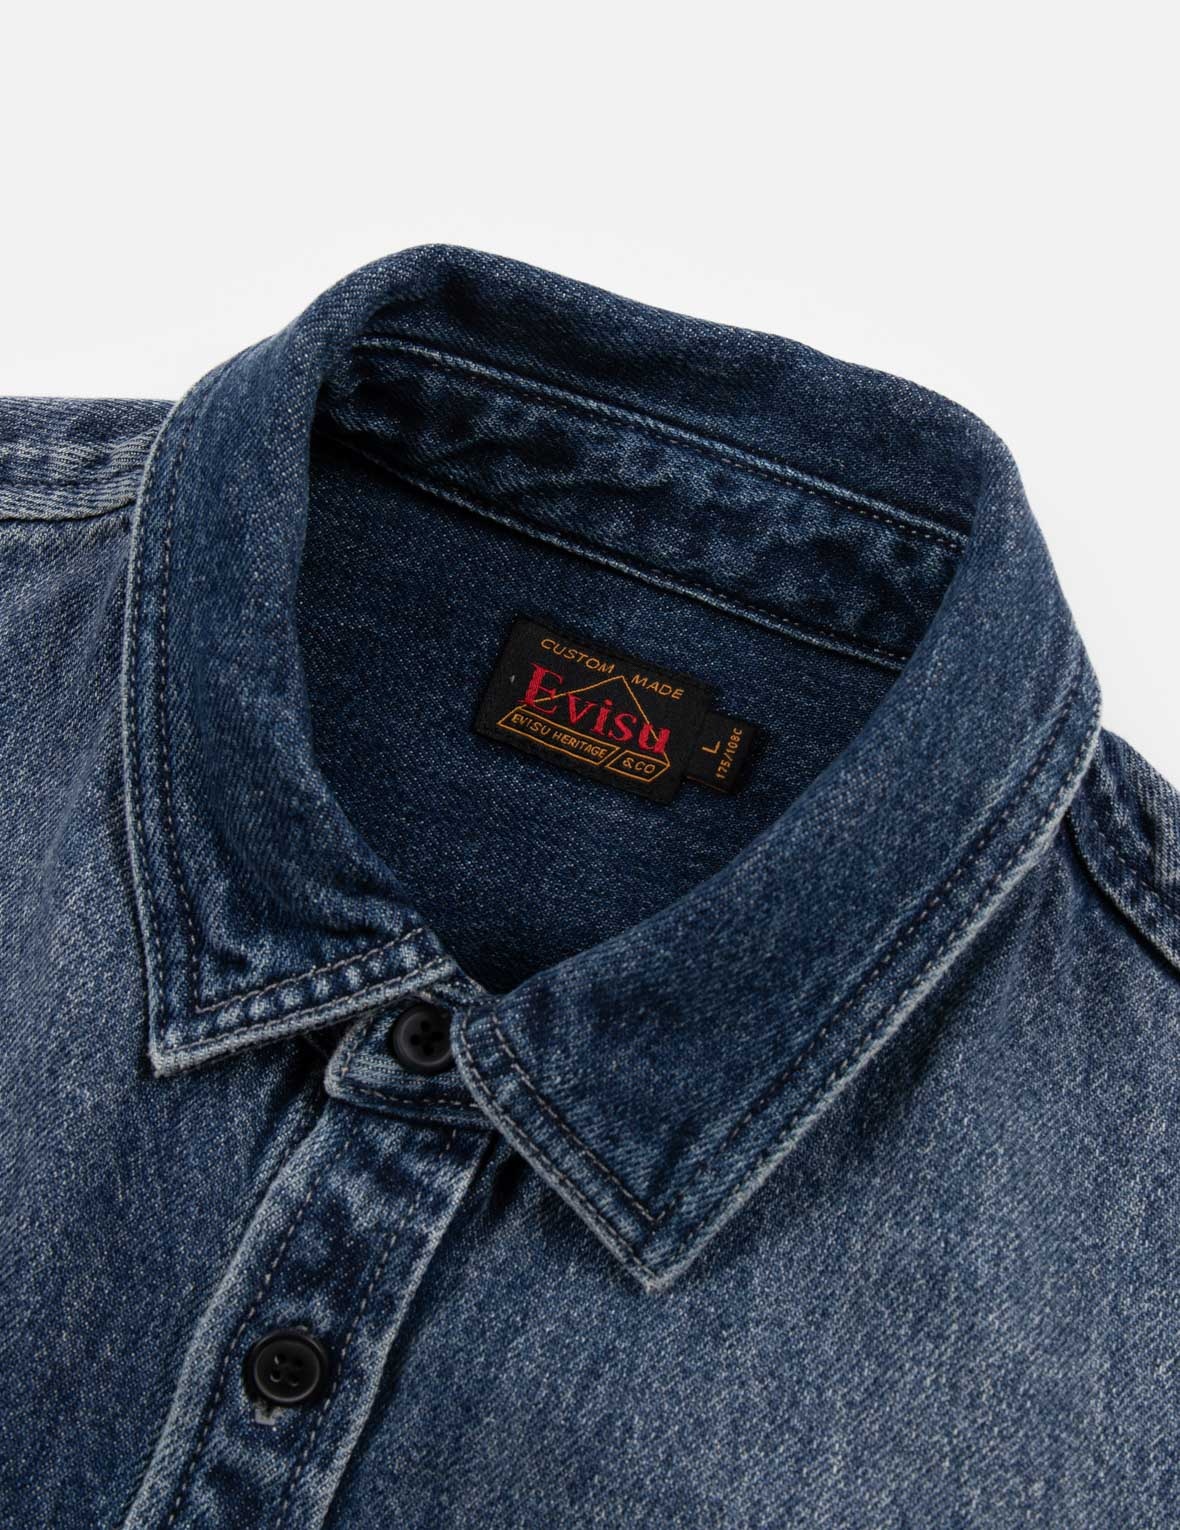 GRUNGE STYLE LOGO AND SEAGULL APPLIQUÉ RELAX FIT DENIM SHIRT - 10